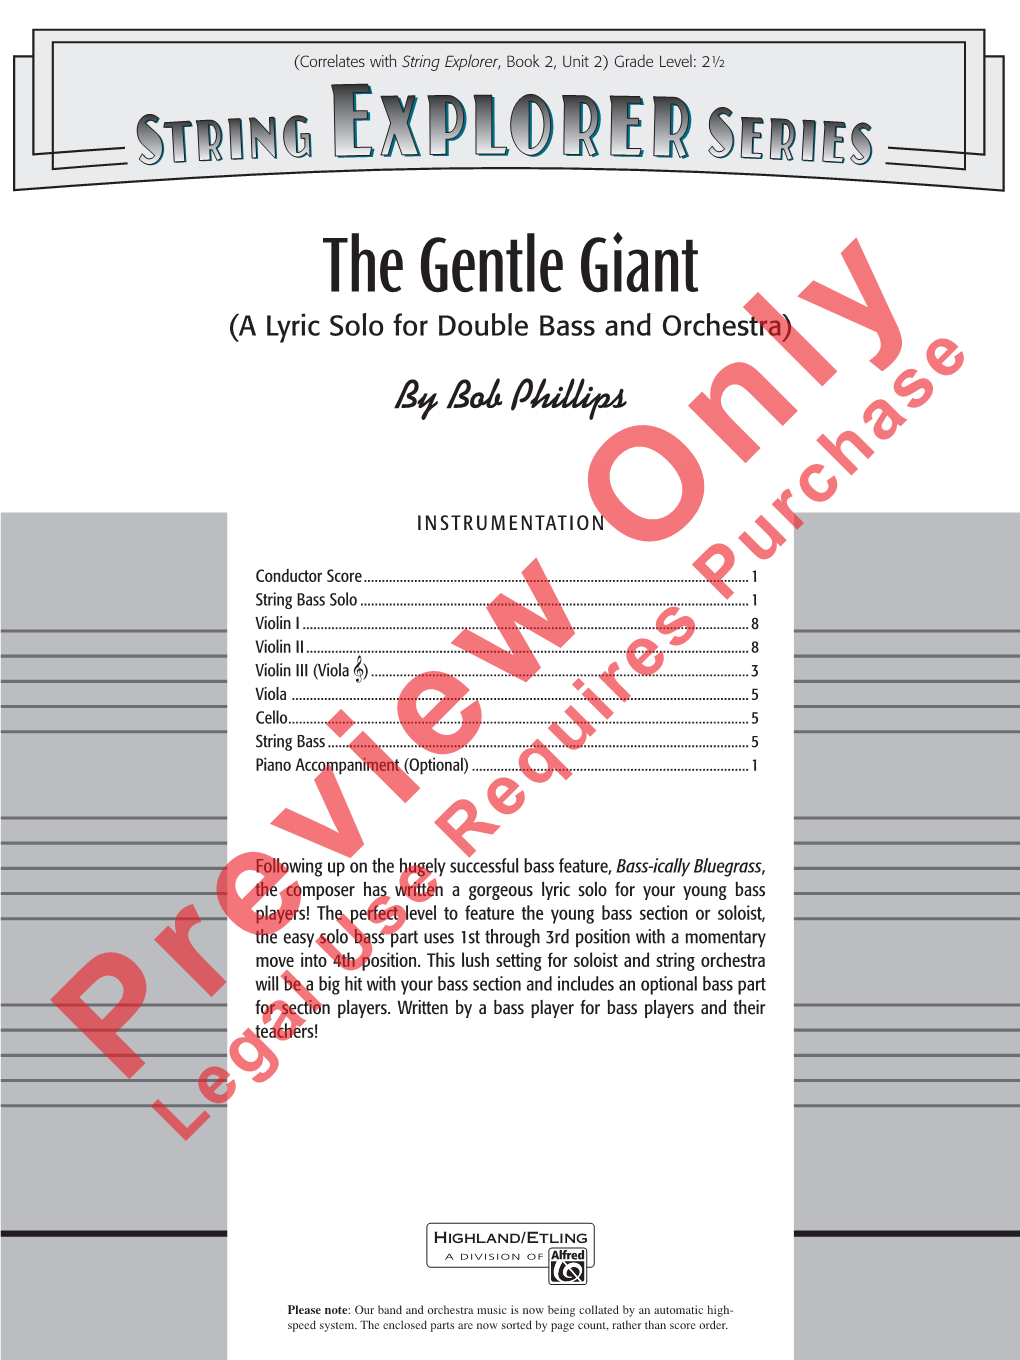 The Gentle Giant (A Lyric Solo for Double Bass and Orchestra) by Bob Phillips